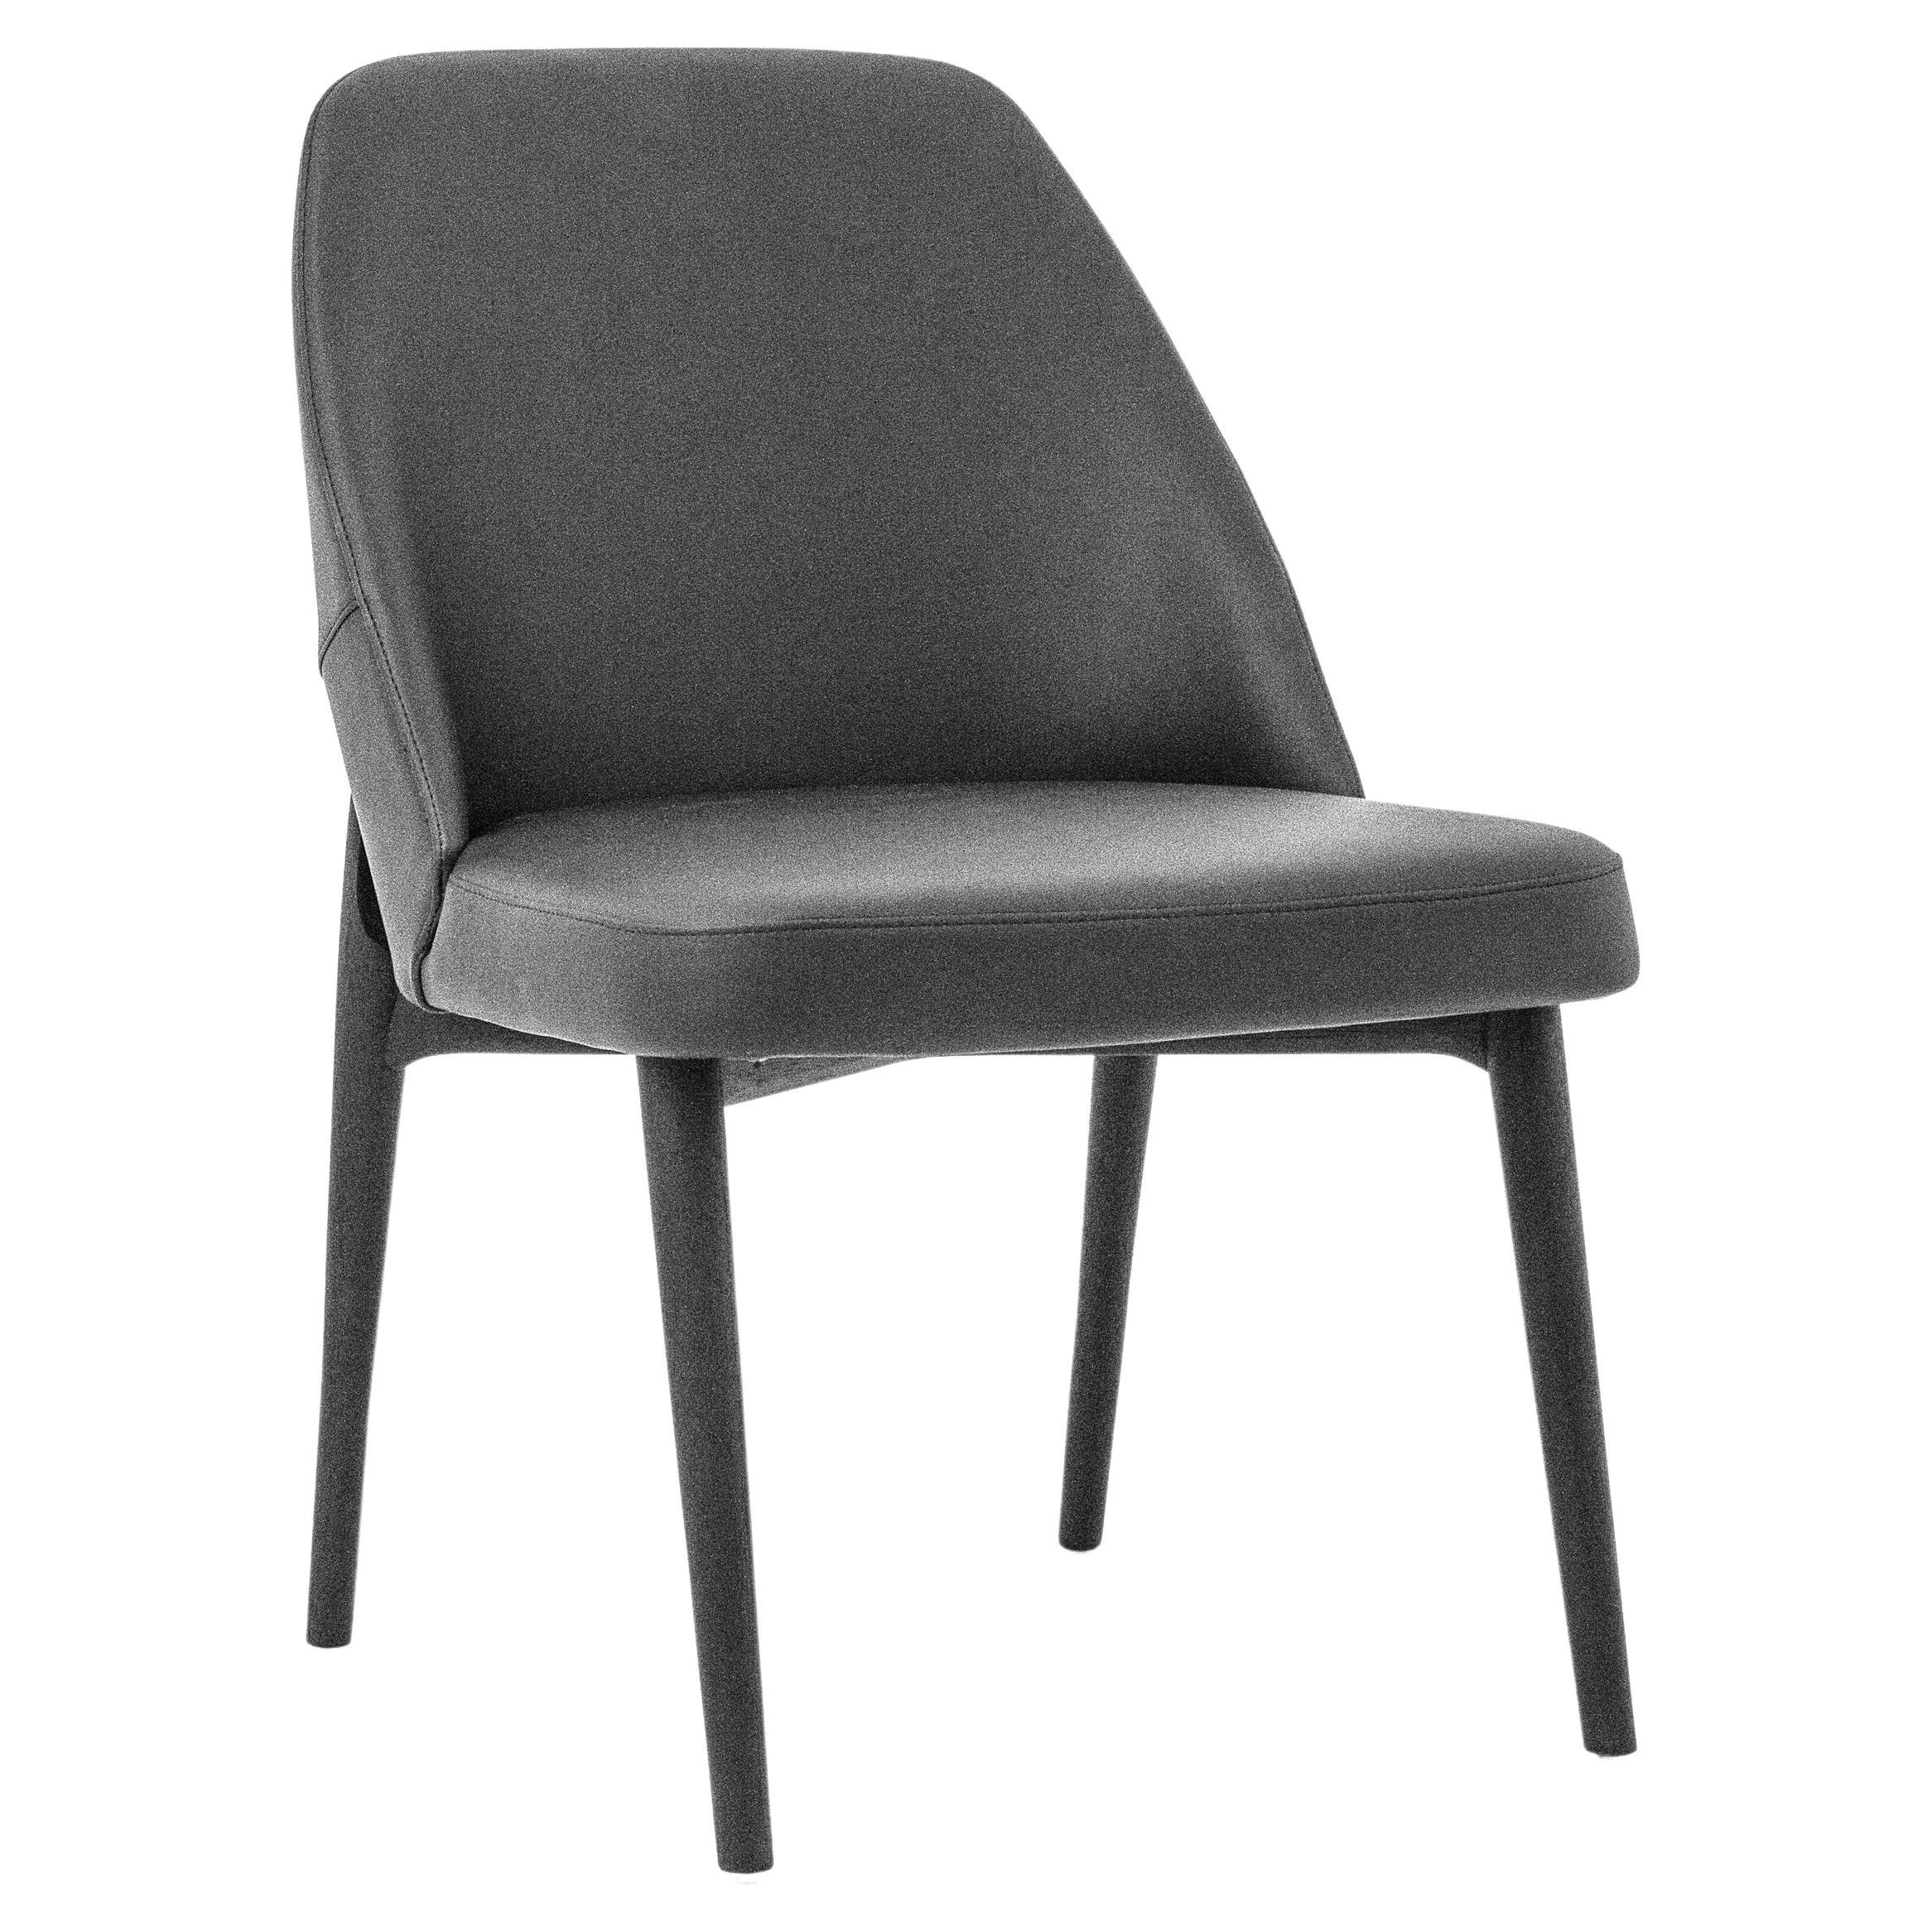 Upholstered Black or Gray Fabric, Dining Chair Dandara For Sale